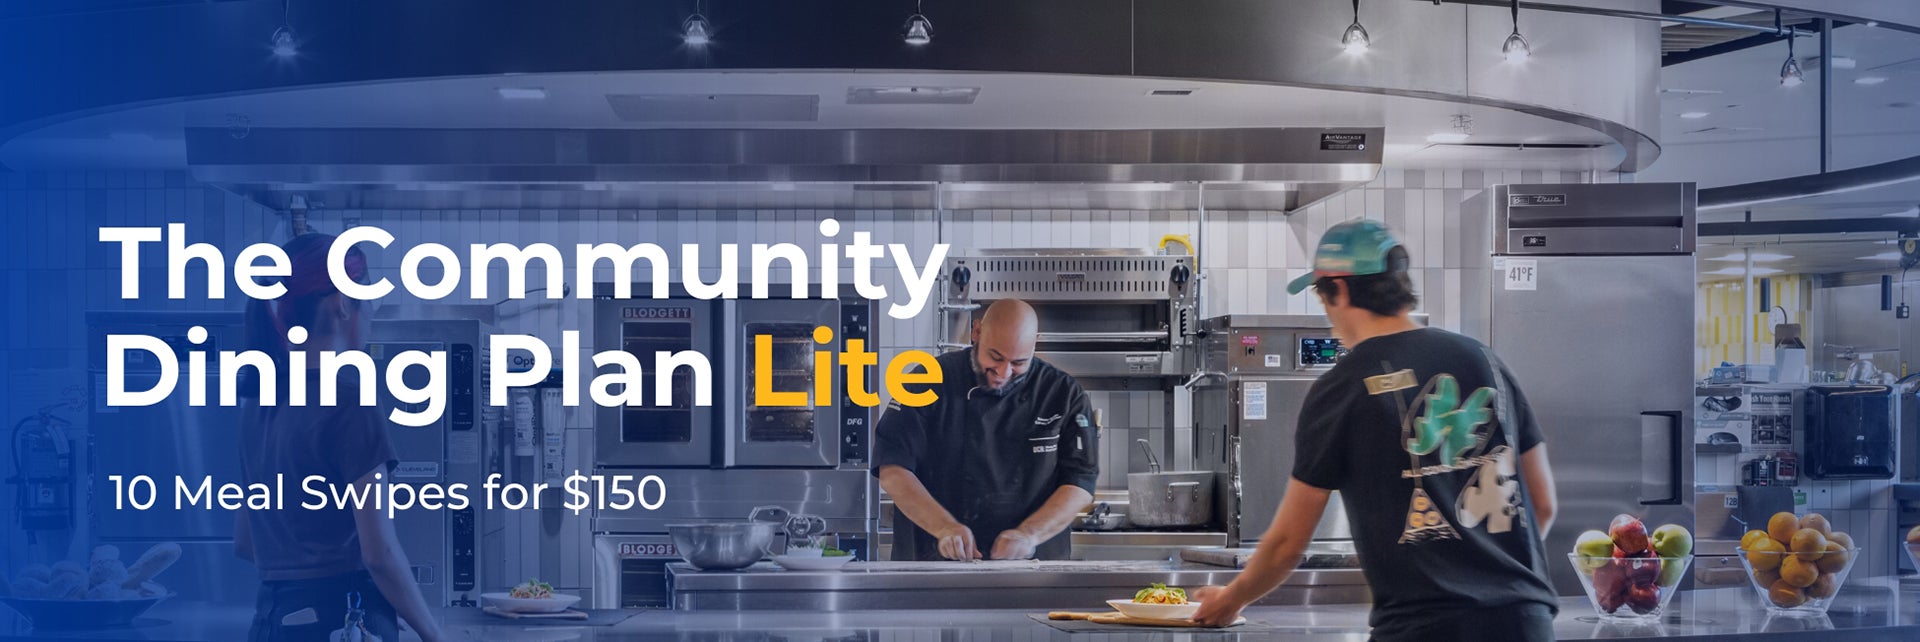 The Community Dining Plan Lite 10 Meal Swipes for $150